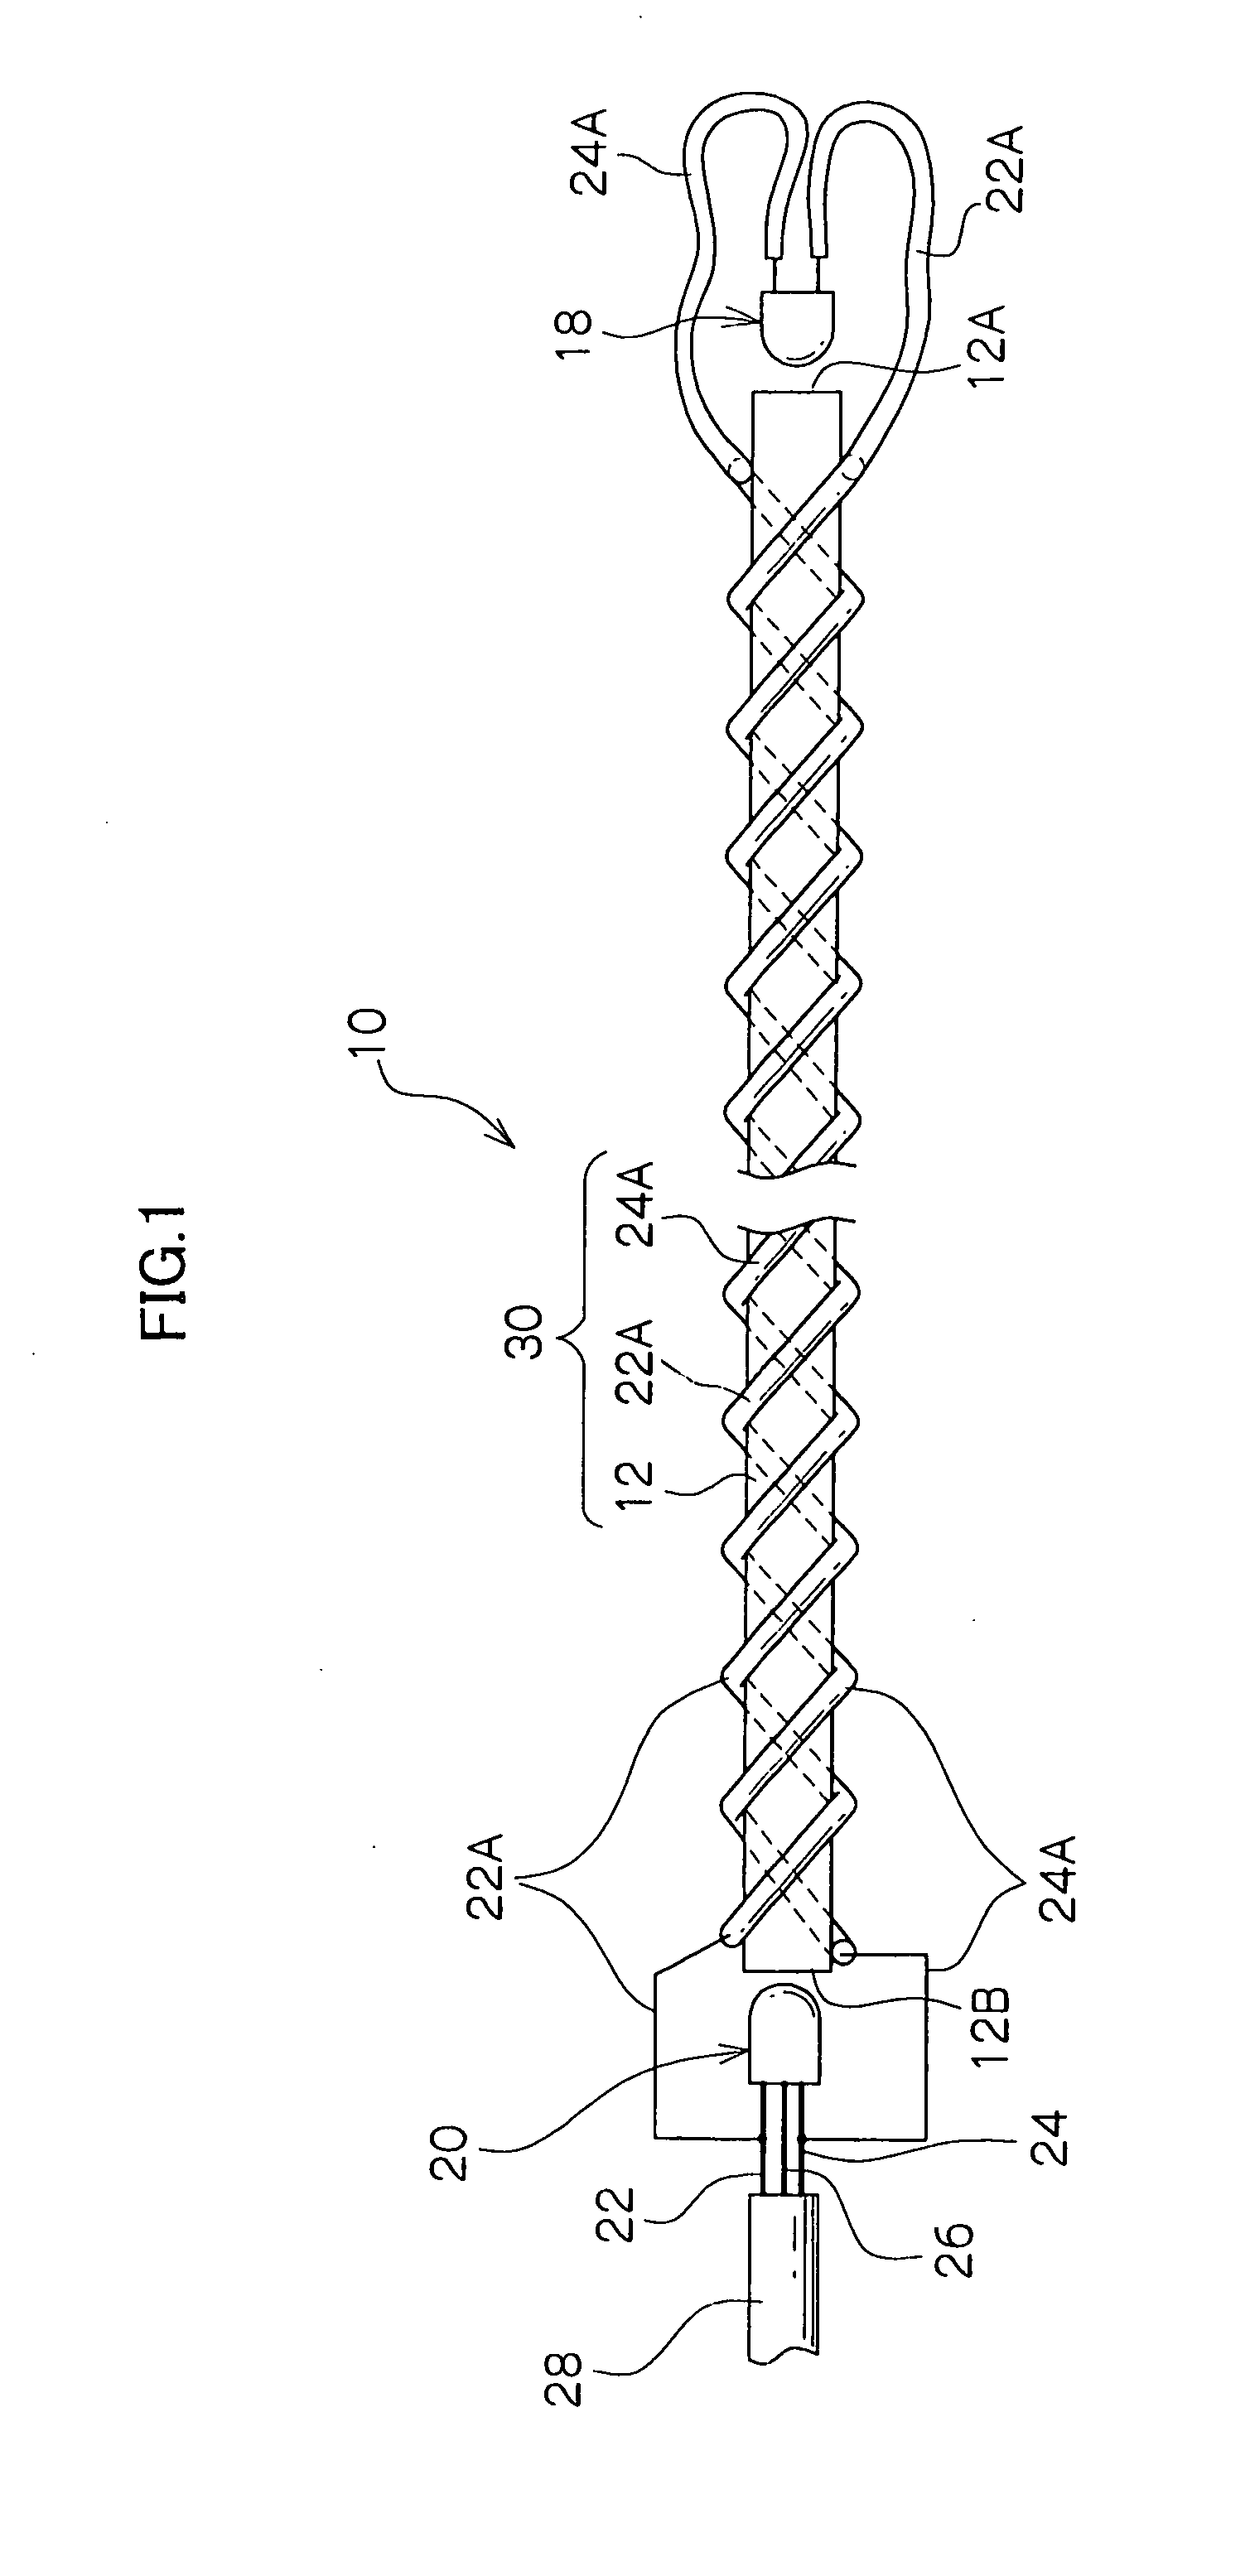 Load detecting device